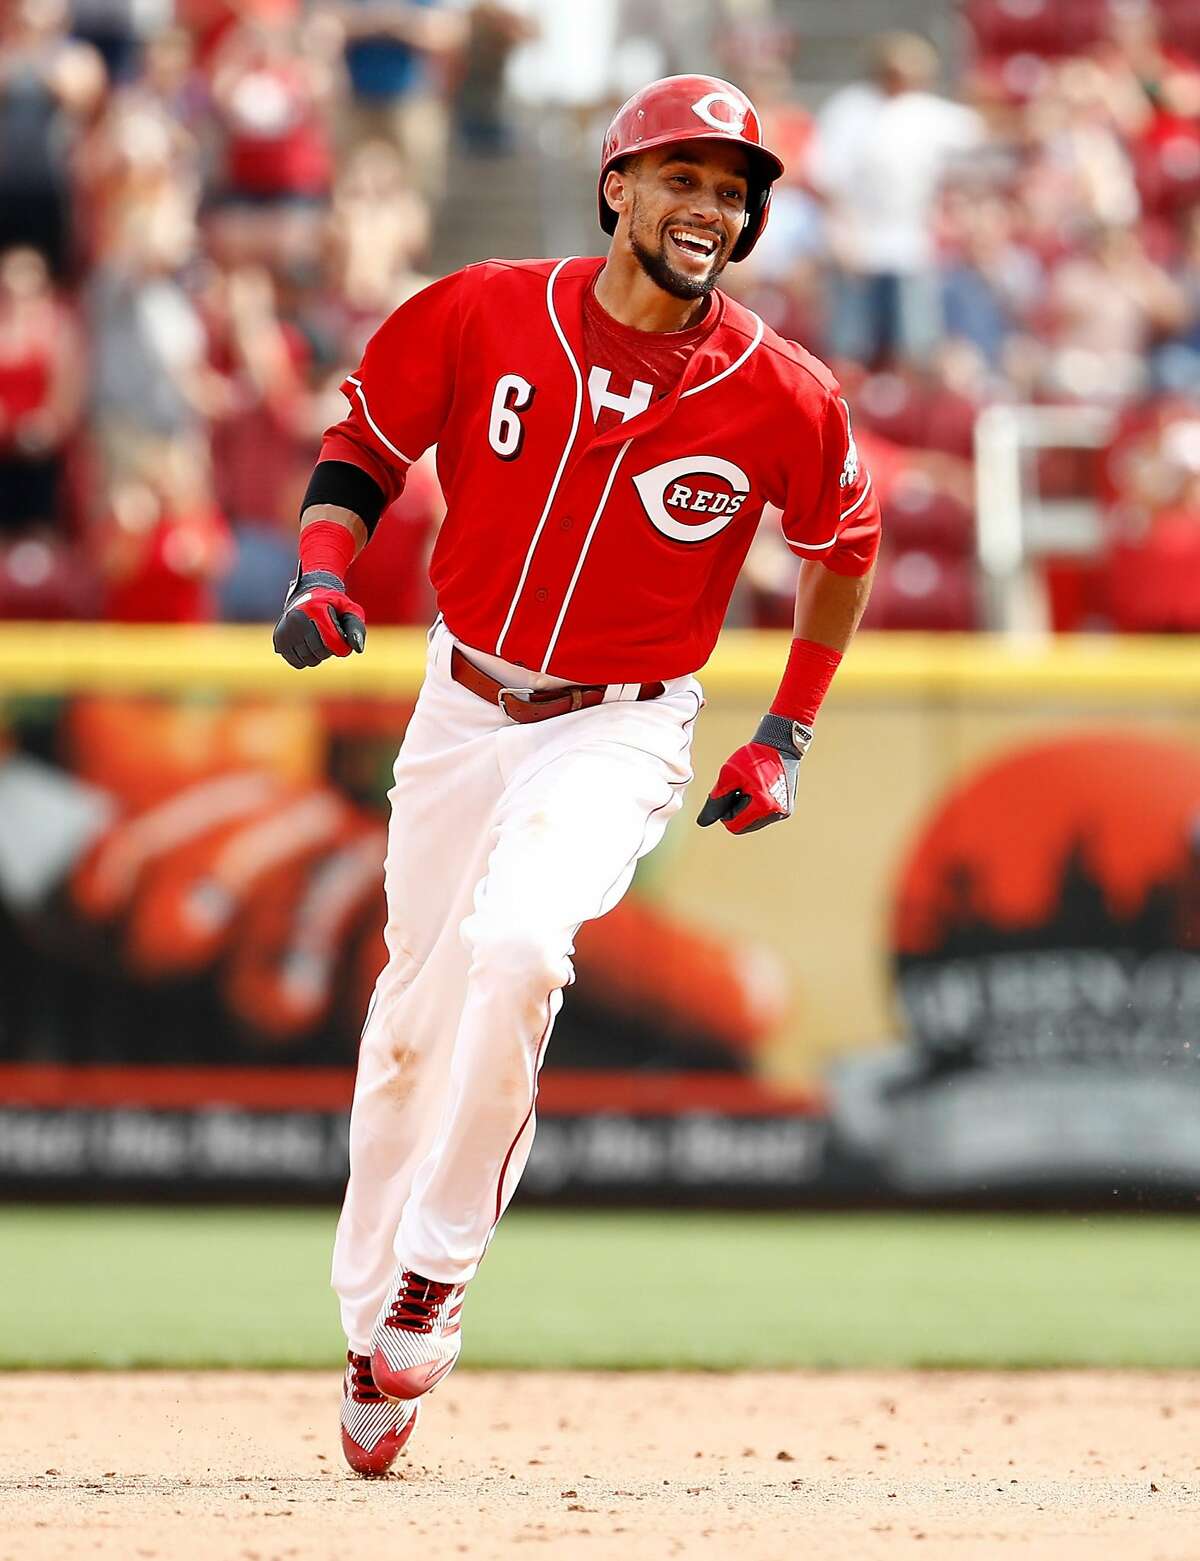 CINCINNATI, OH - SEPTEMBER 04: Billy Hamilton #6 of the Cincinnati Reds celebrates after hitting the game winning home run in the 9th inning against the Milwaukee Brewers at Great American Ball Park on September 4, 2017 in Cincinnati, Ohio. The Reds won 5-4. (Photo by Andy Lyons/Getty Images)